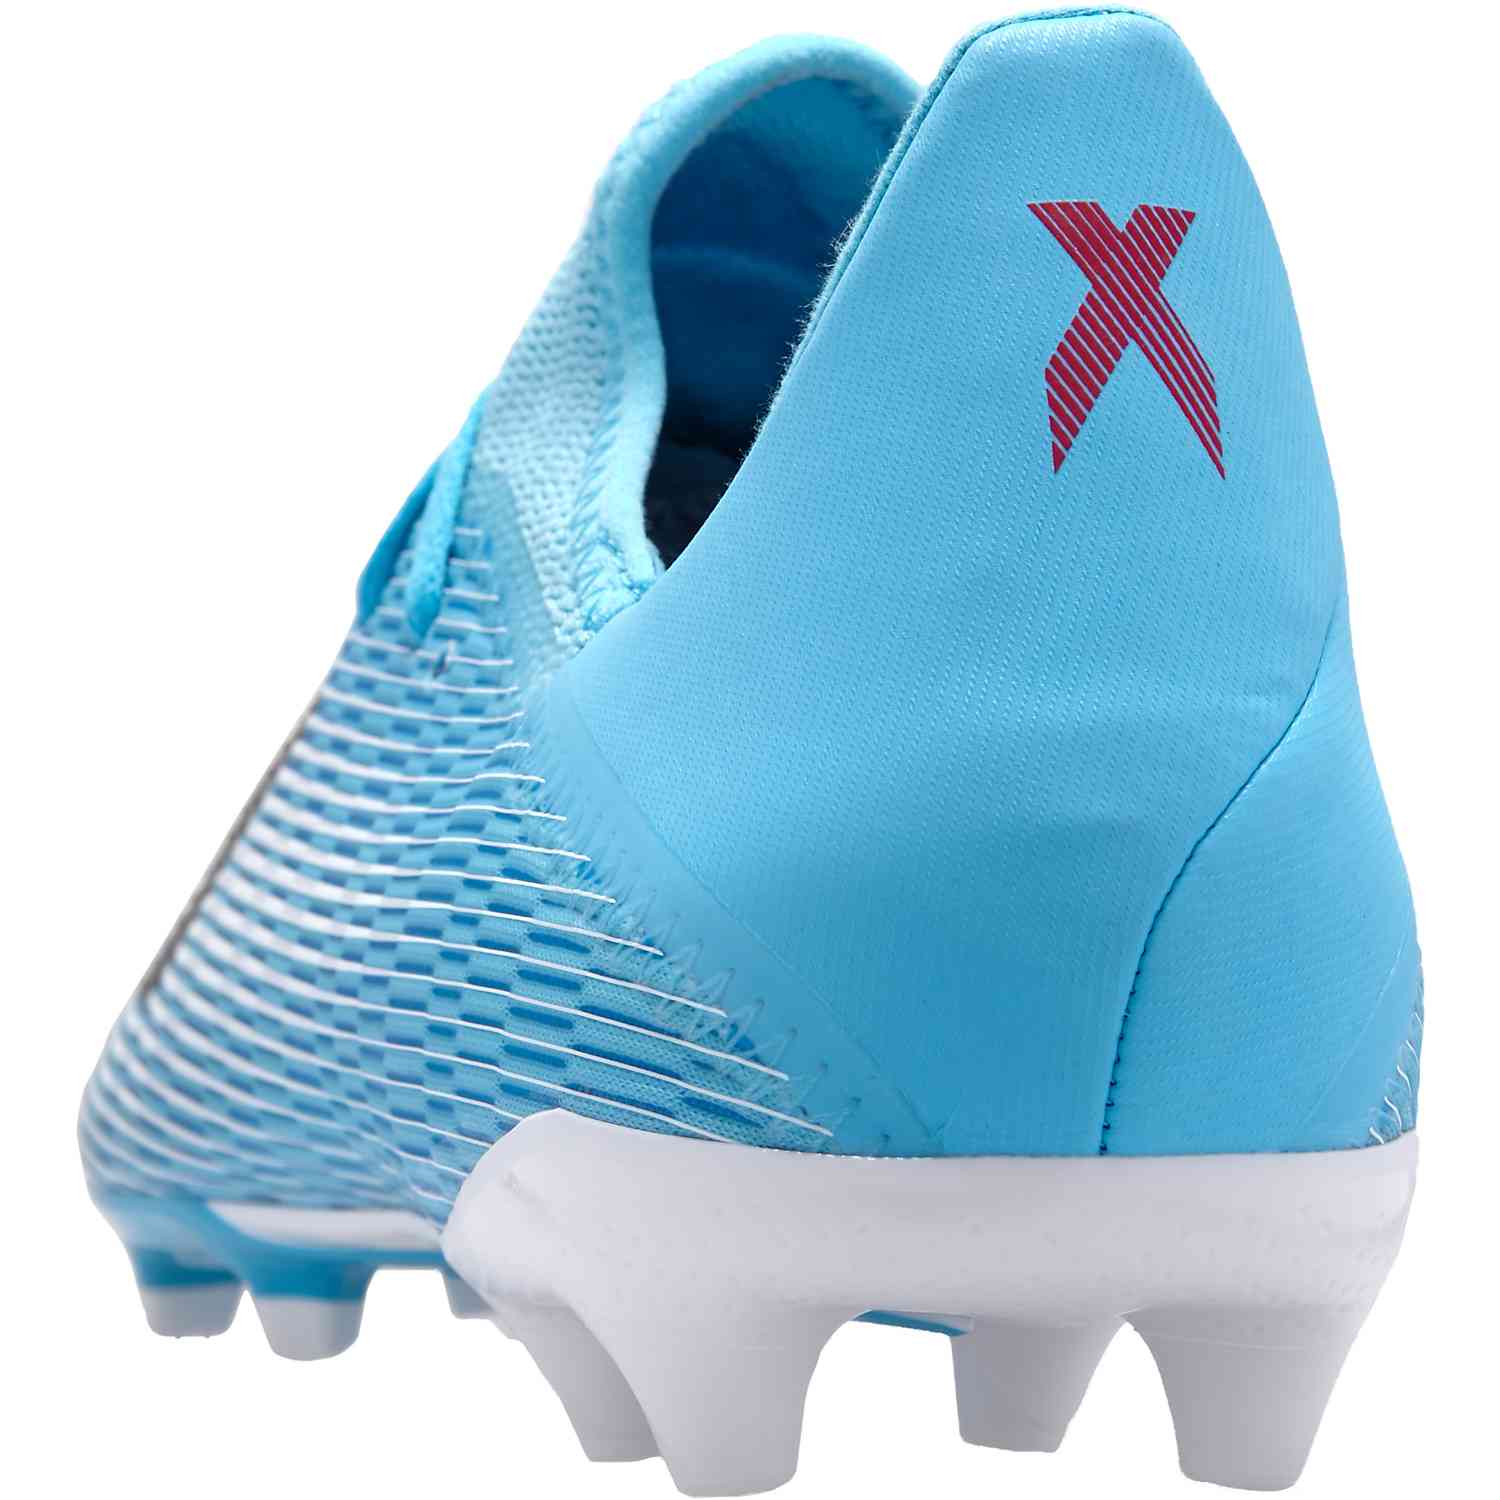 x 19.3 firm ground cleats